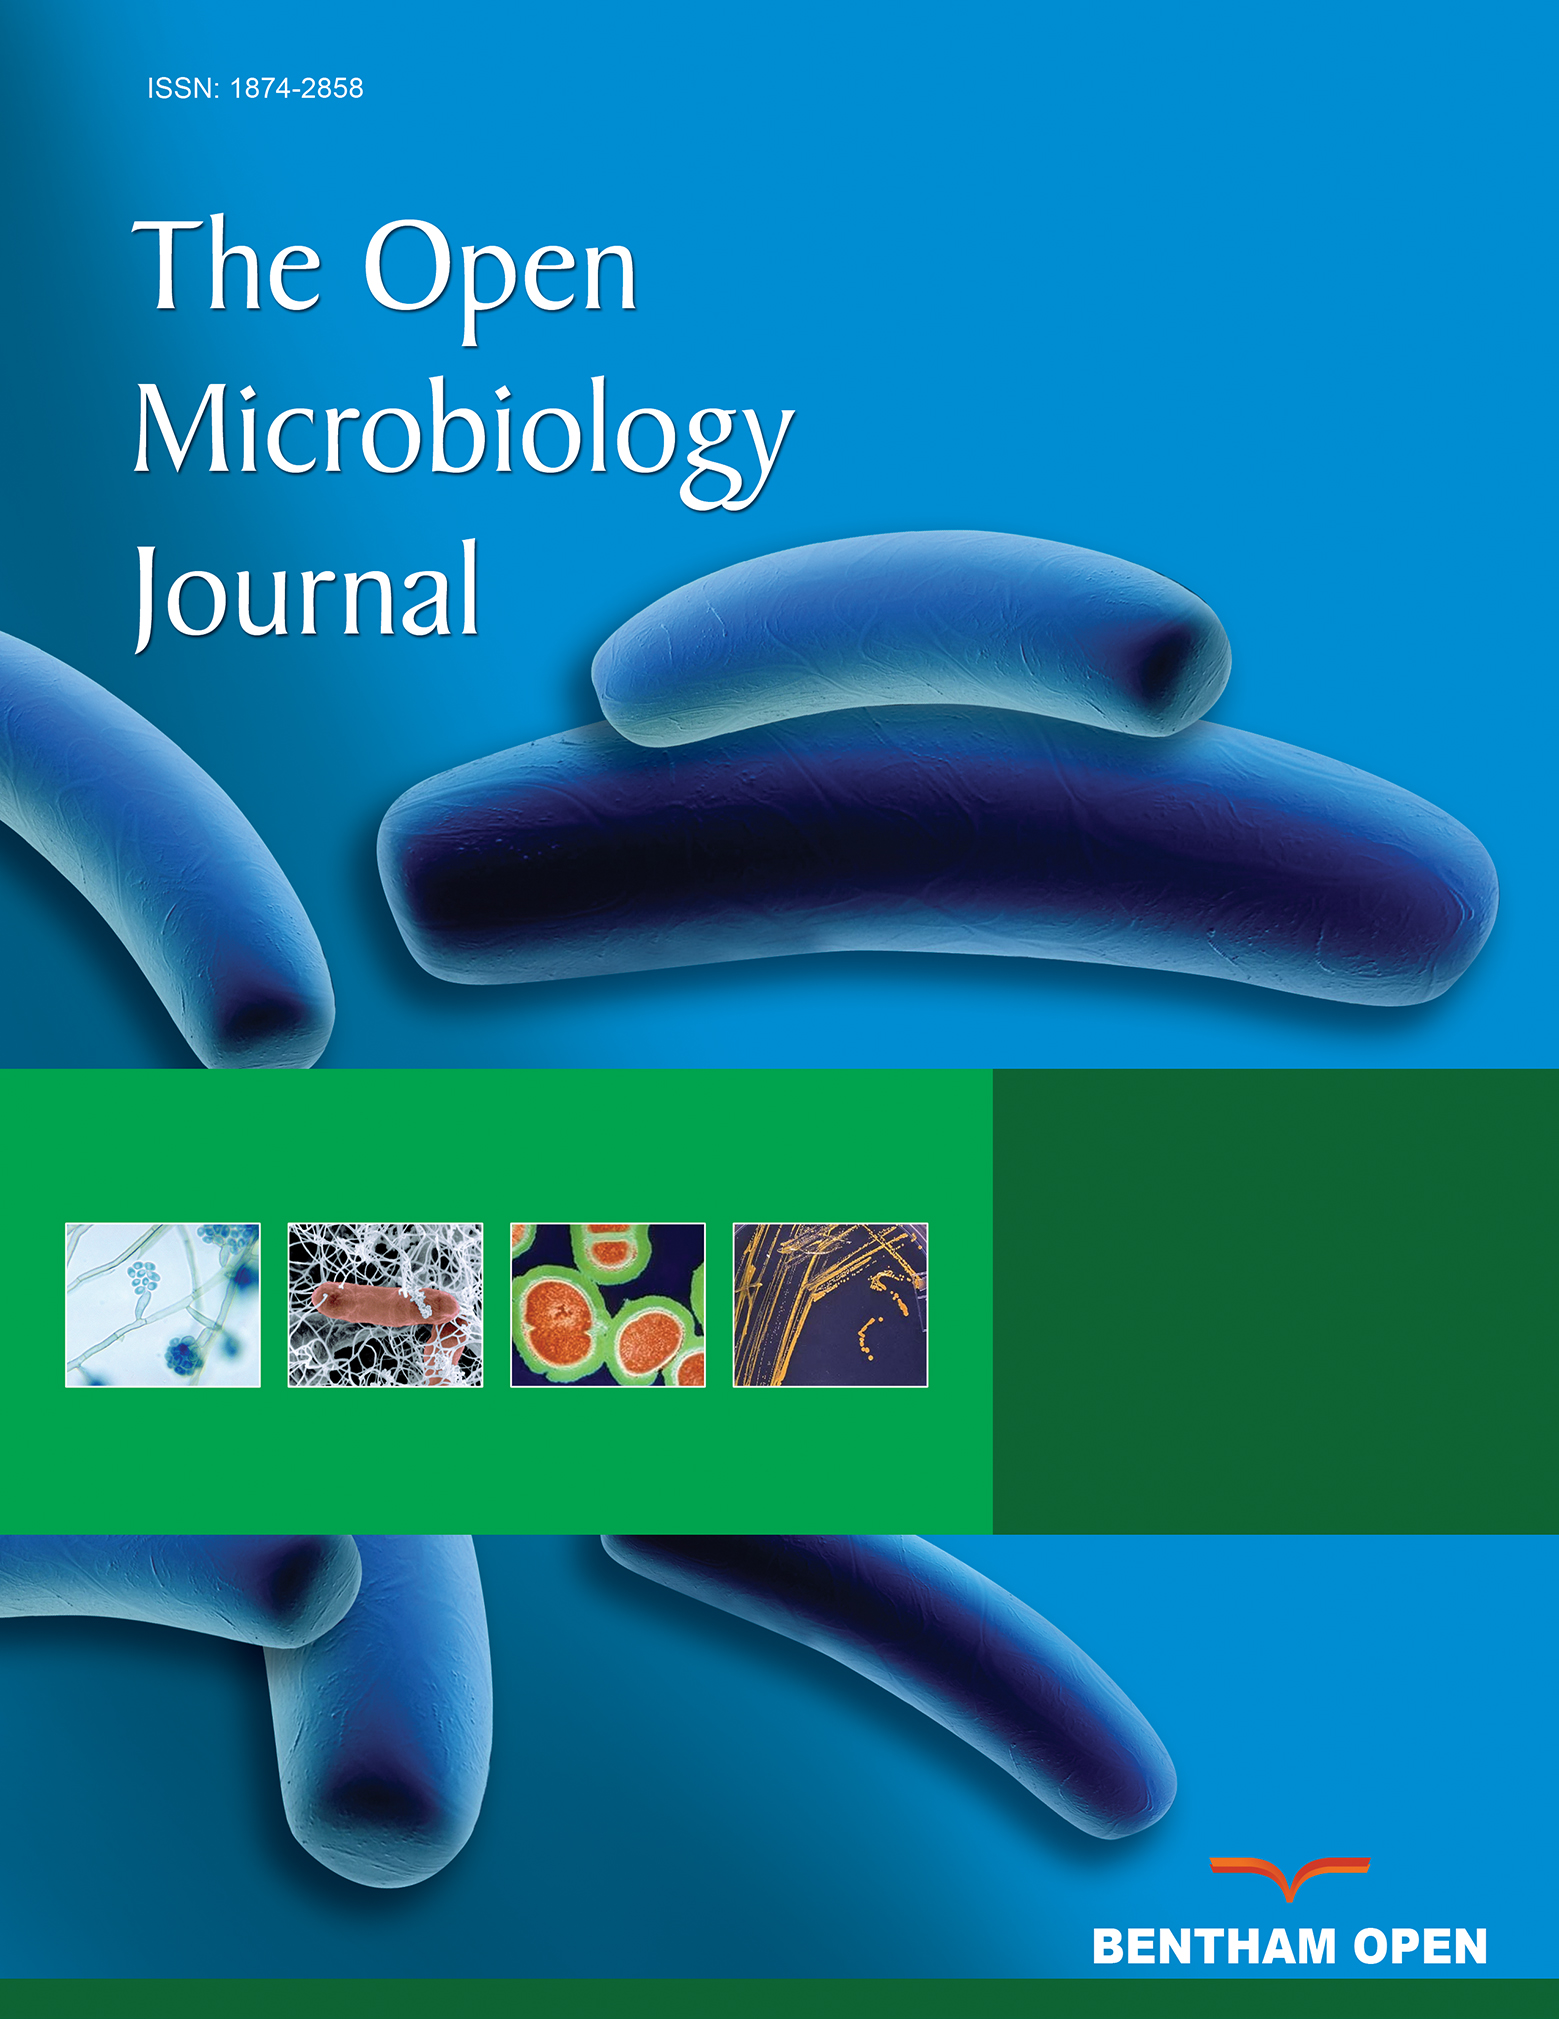 The Open Microbiology Journal